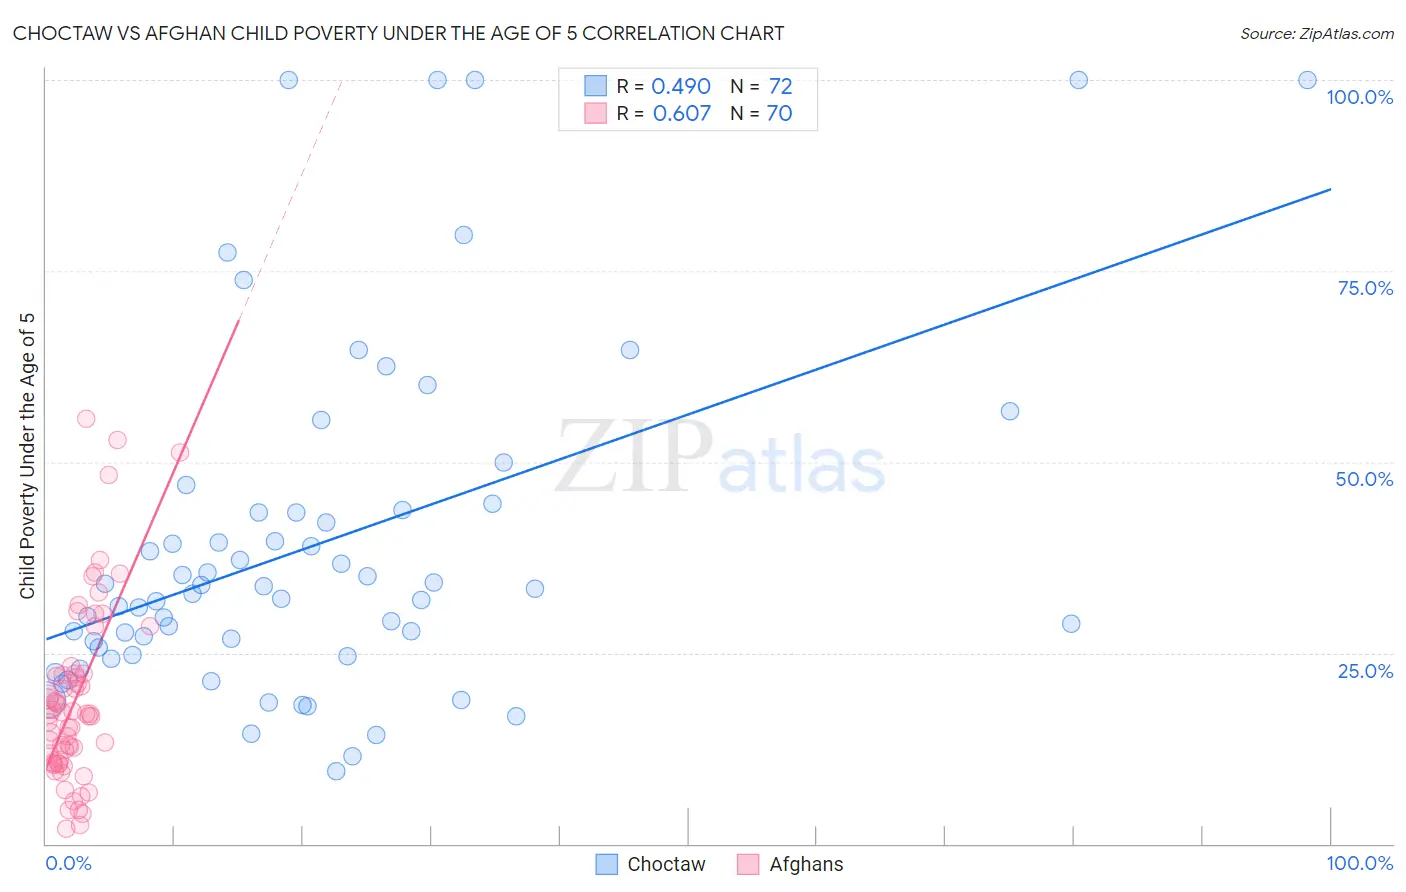 Choctaw vs Afghan Child Poverty Under the Age of 5